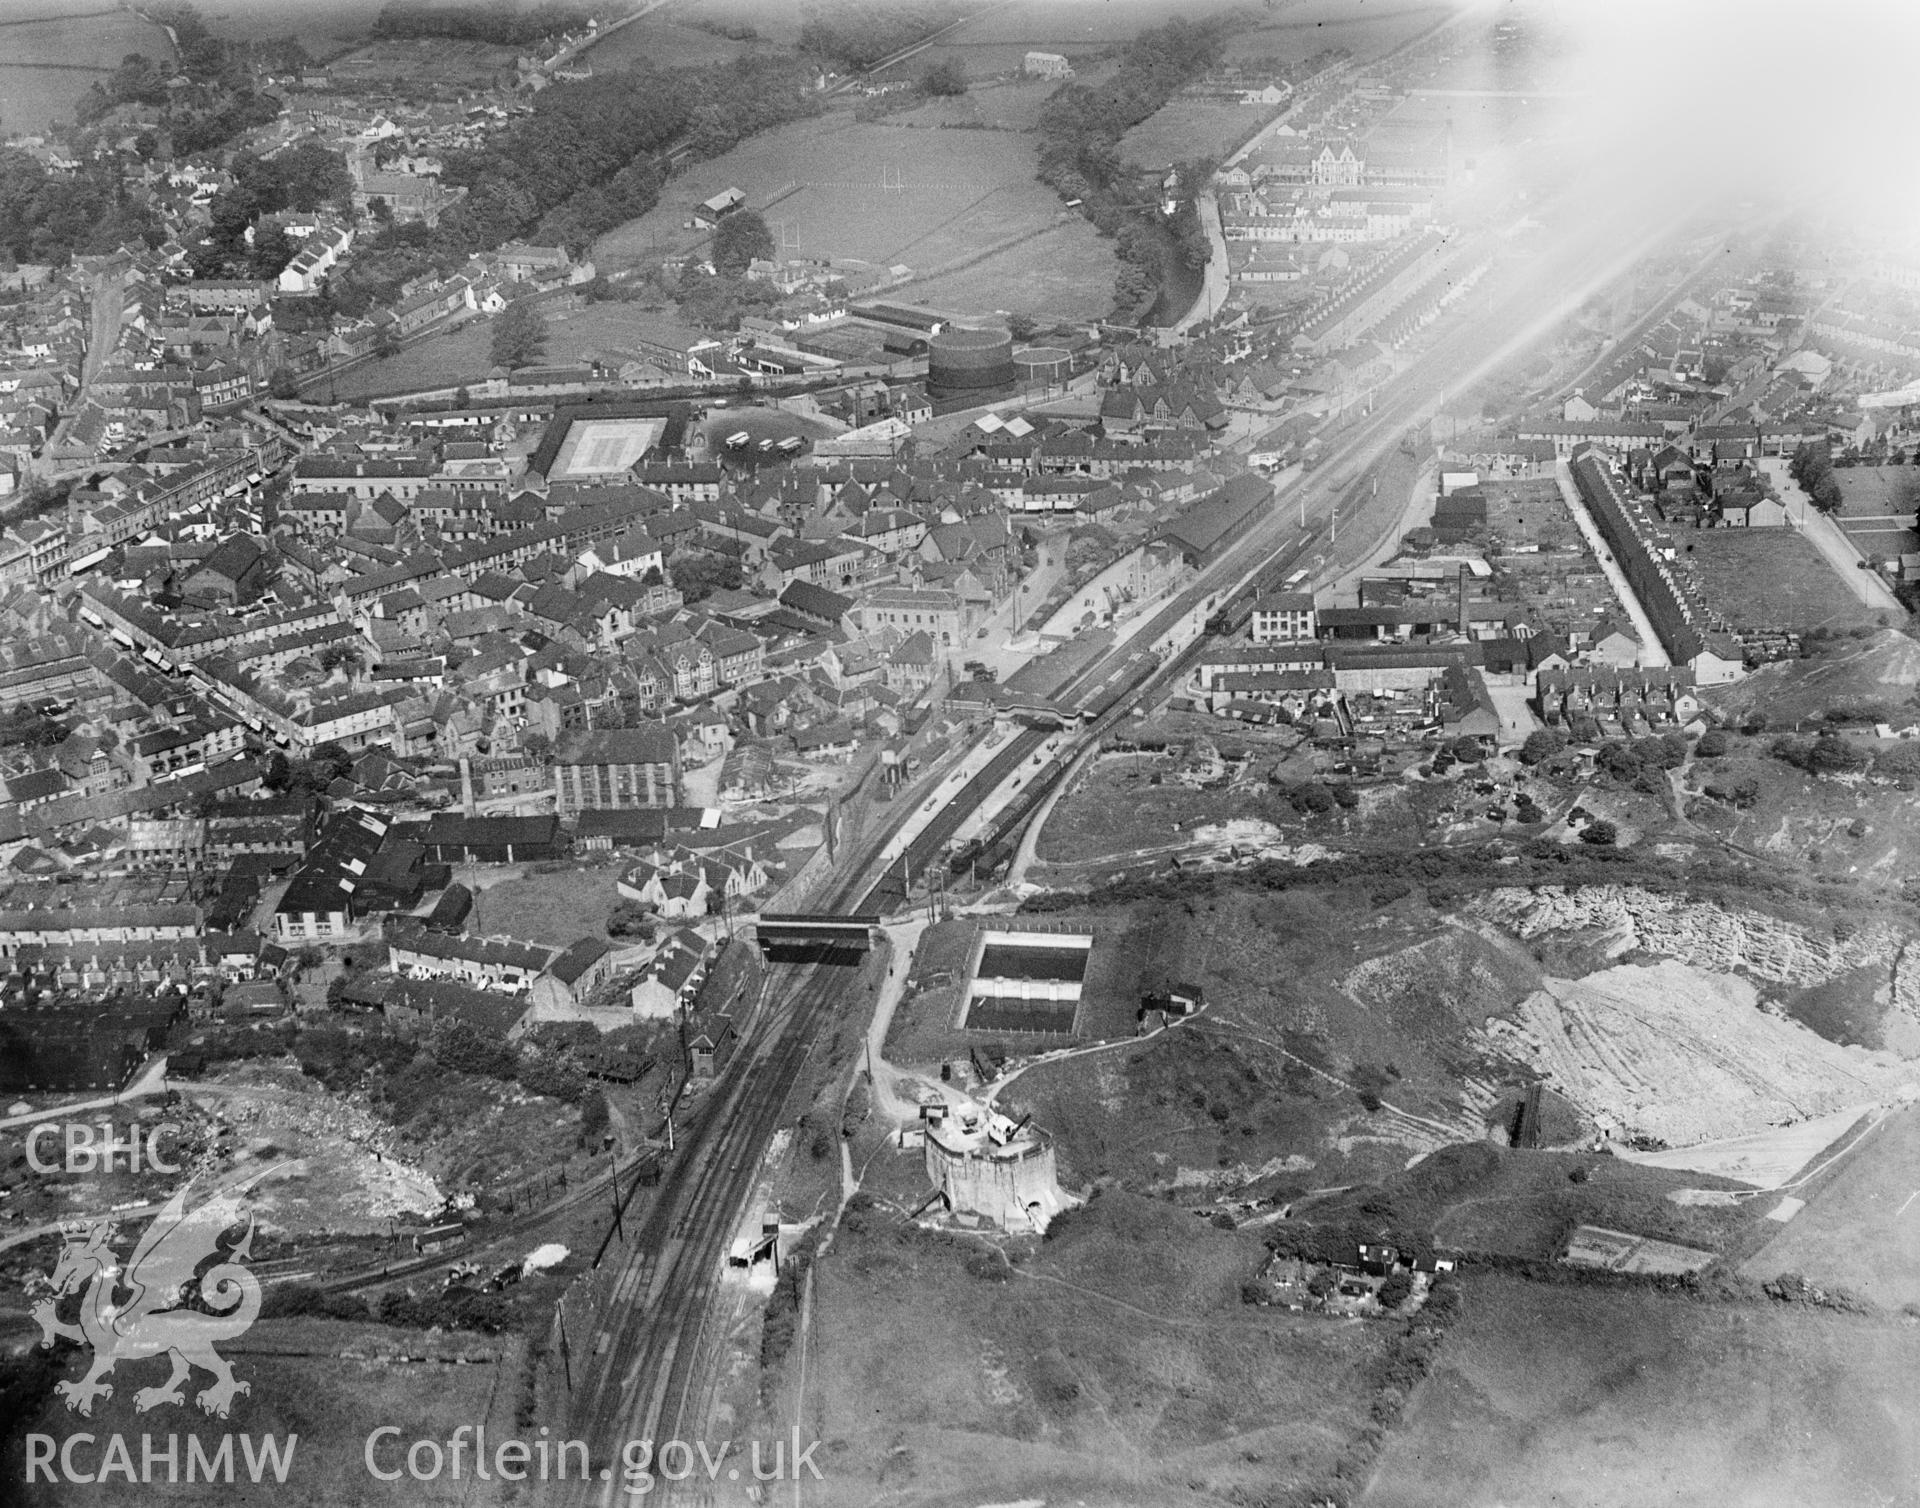 General view of Bridgend showing the Brewery Field stadium, oblique aerial view. 5?x4? black and white glass plate negative.